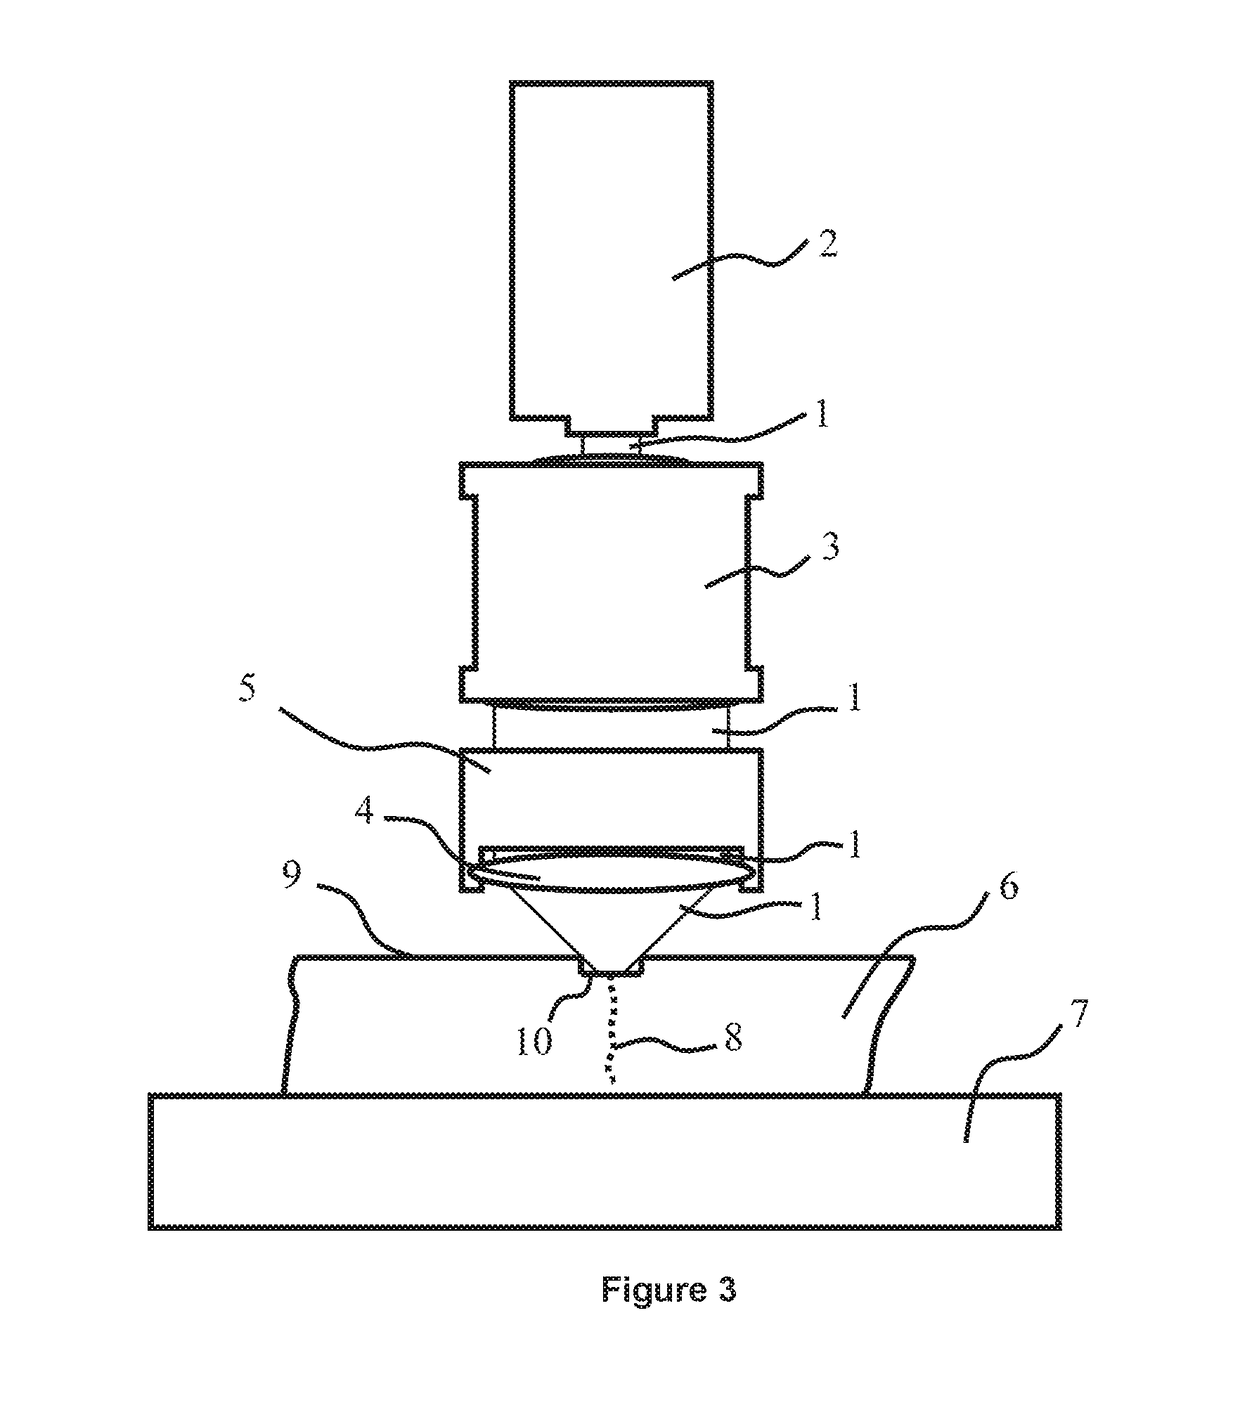 Method of laser processing for substrate cleaving or dicing through forming "spike-like" shaped damage structures